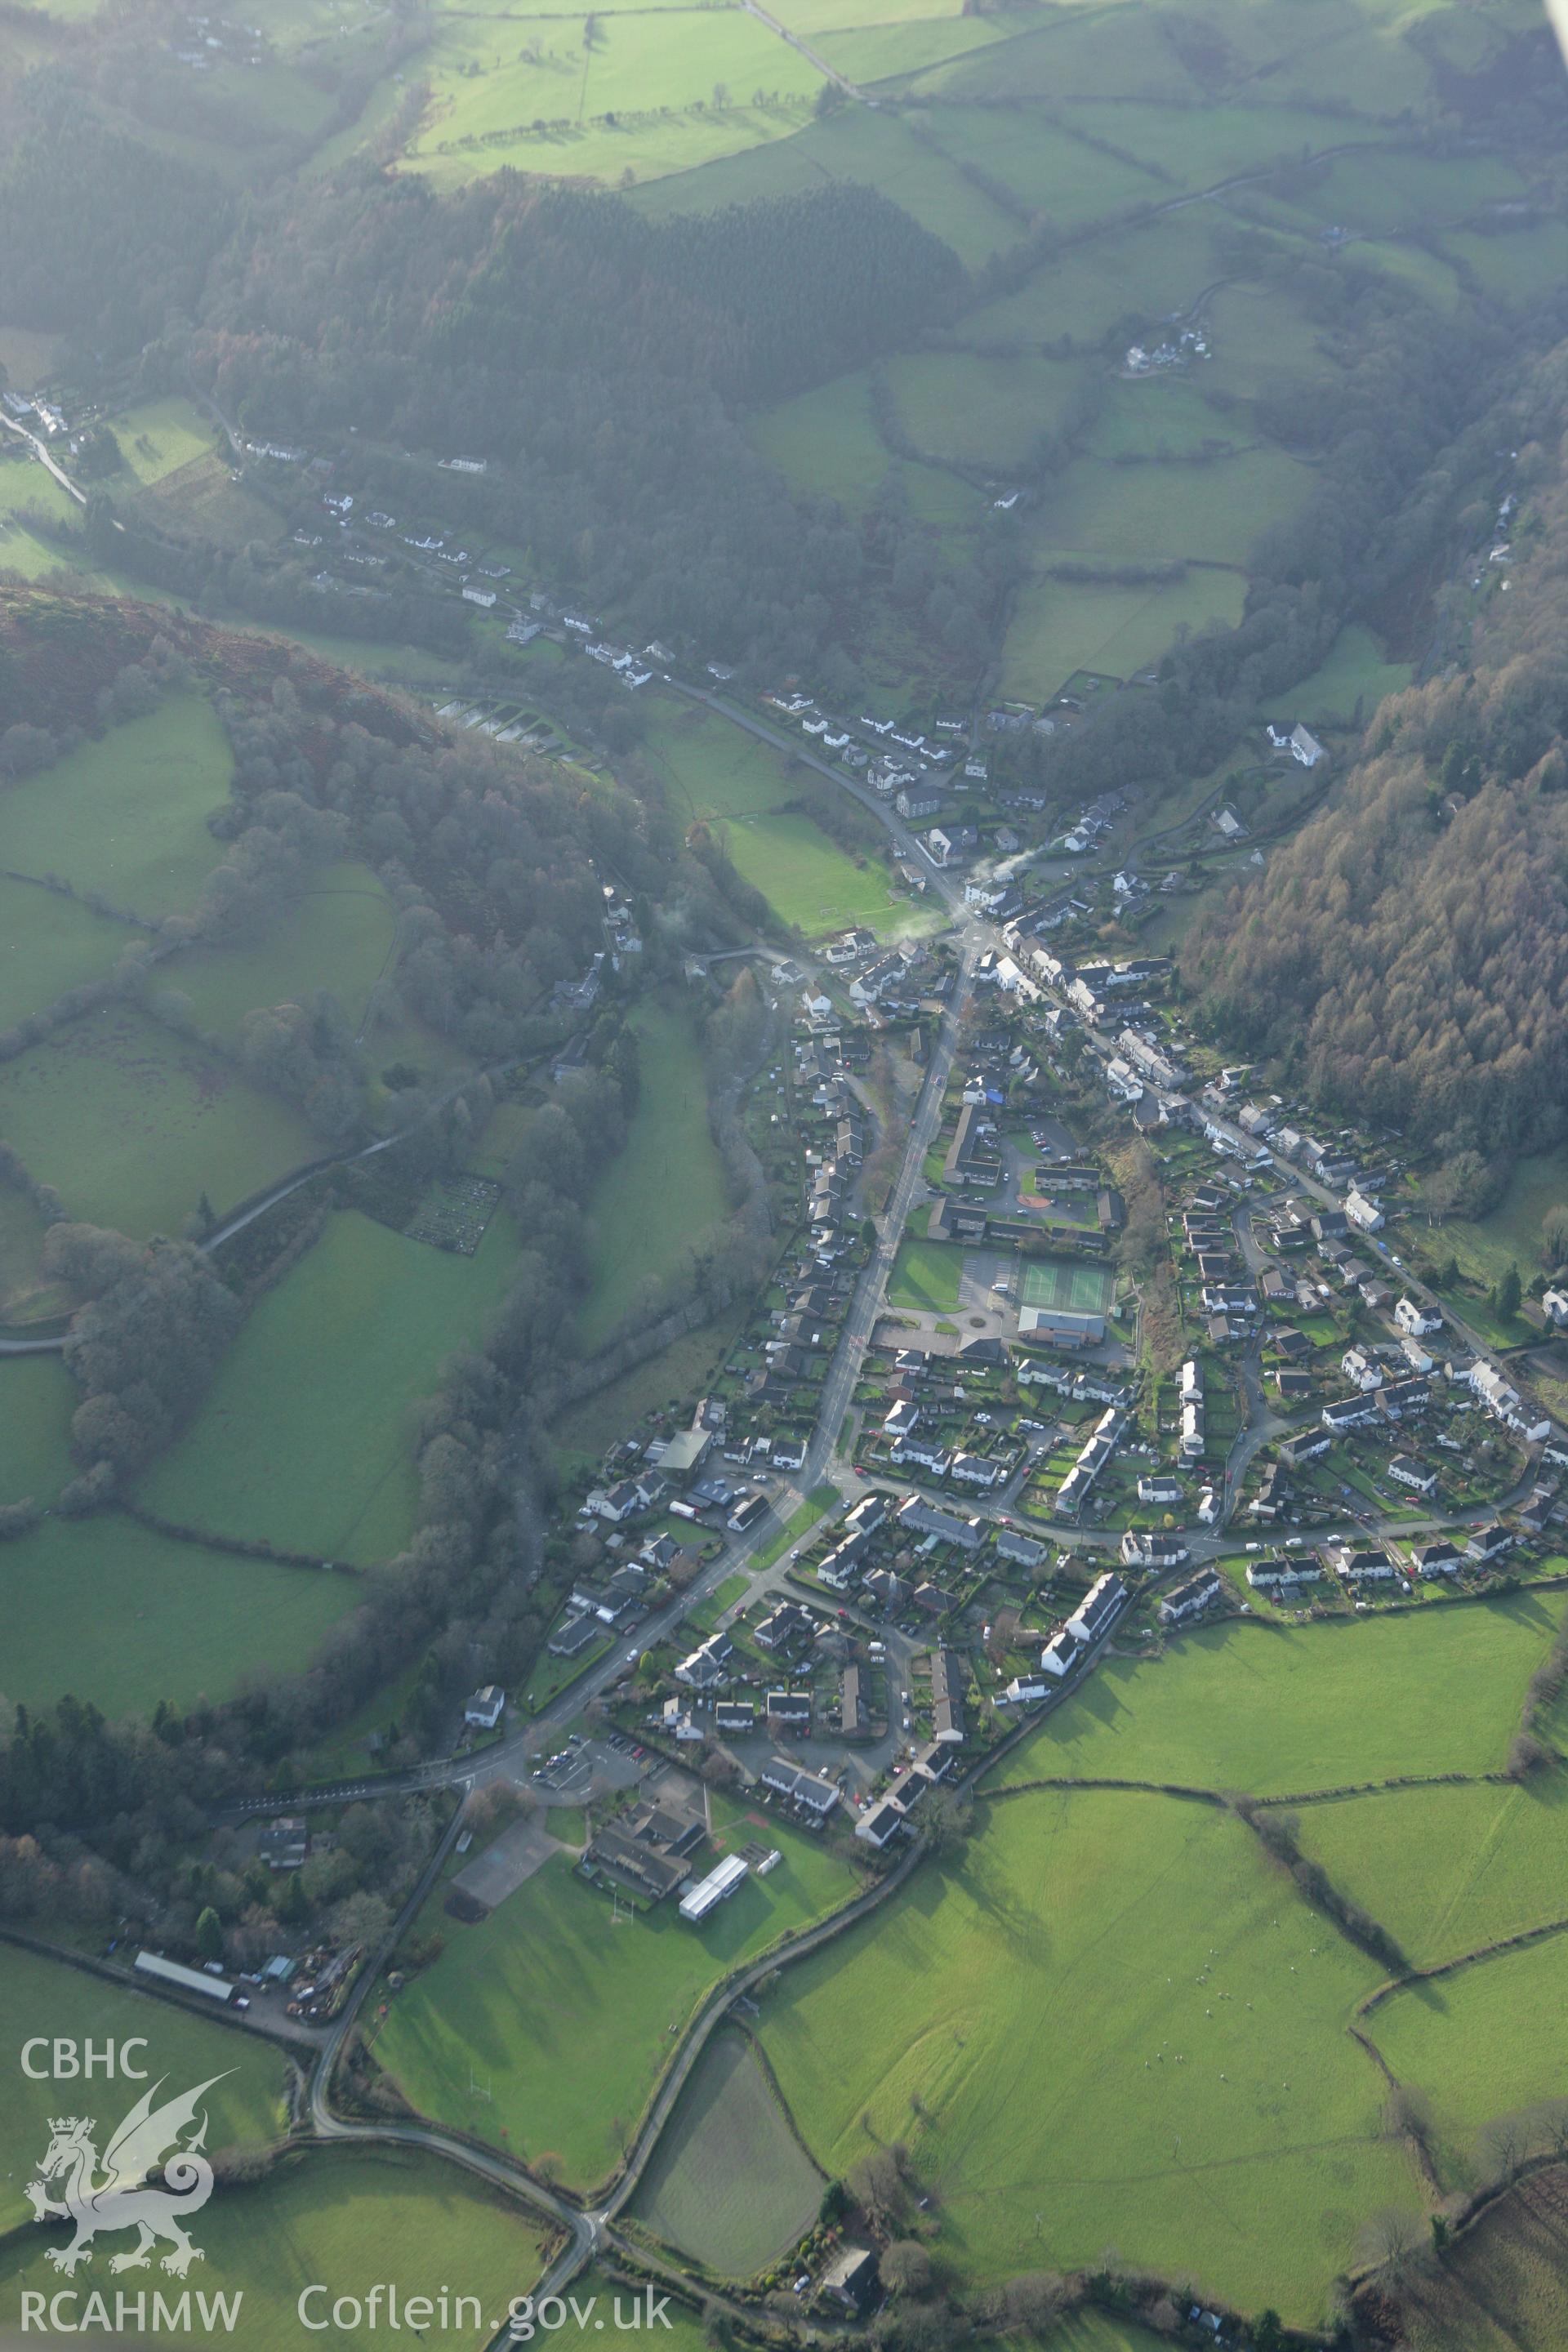 RCAHMW colour oblique aerial photograph of Glyn Ceiriog. Taken on 10 December 2009 by Toby Driver